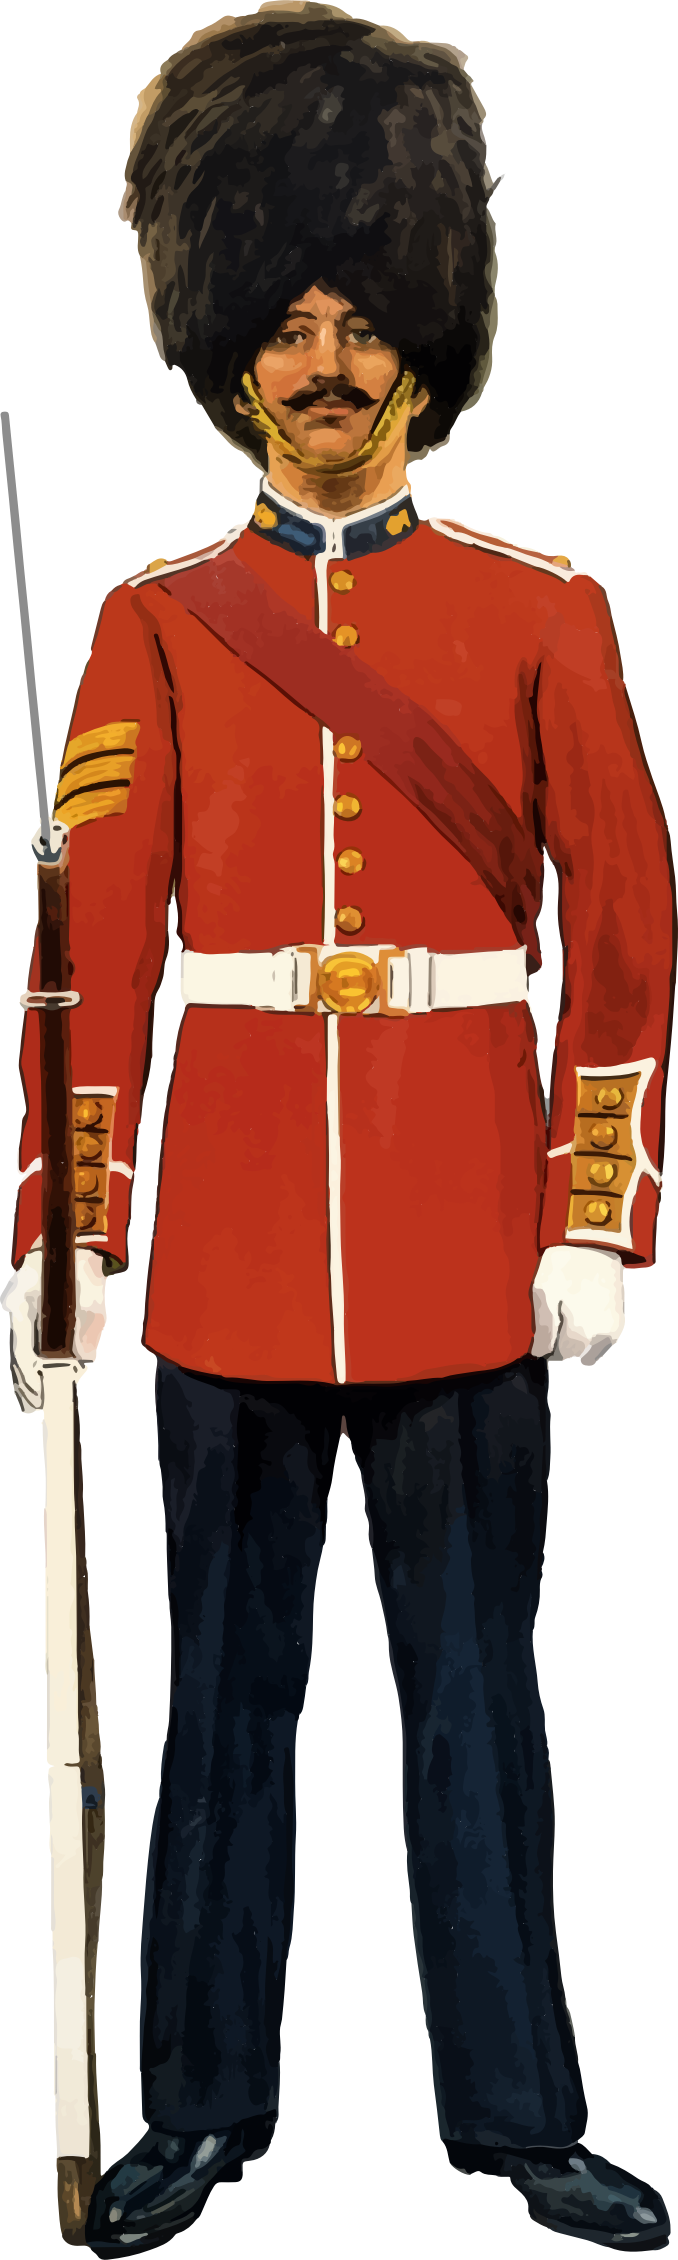 uk army clipart - photo #20